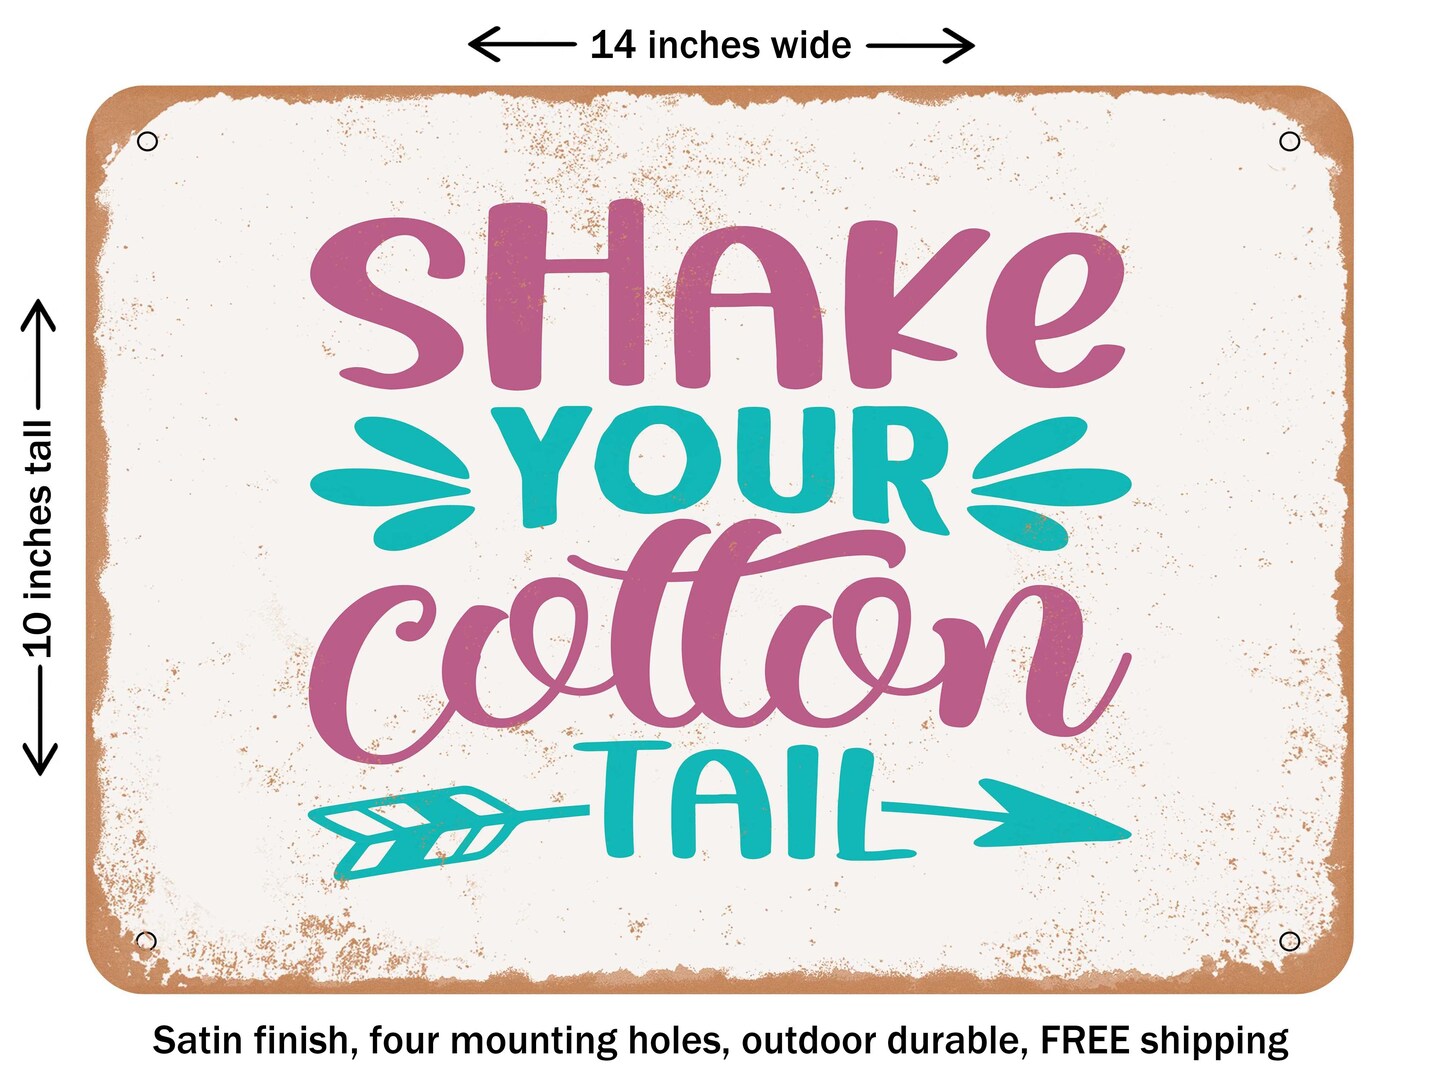 DECORATIVE METAL SIGN - Shake Your Cotton Tail - 2 - Vintage Rusty Look